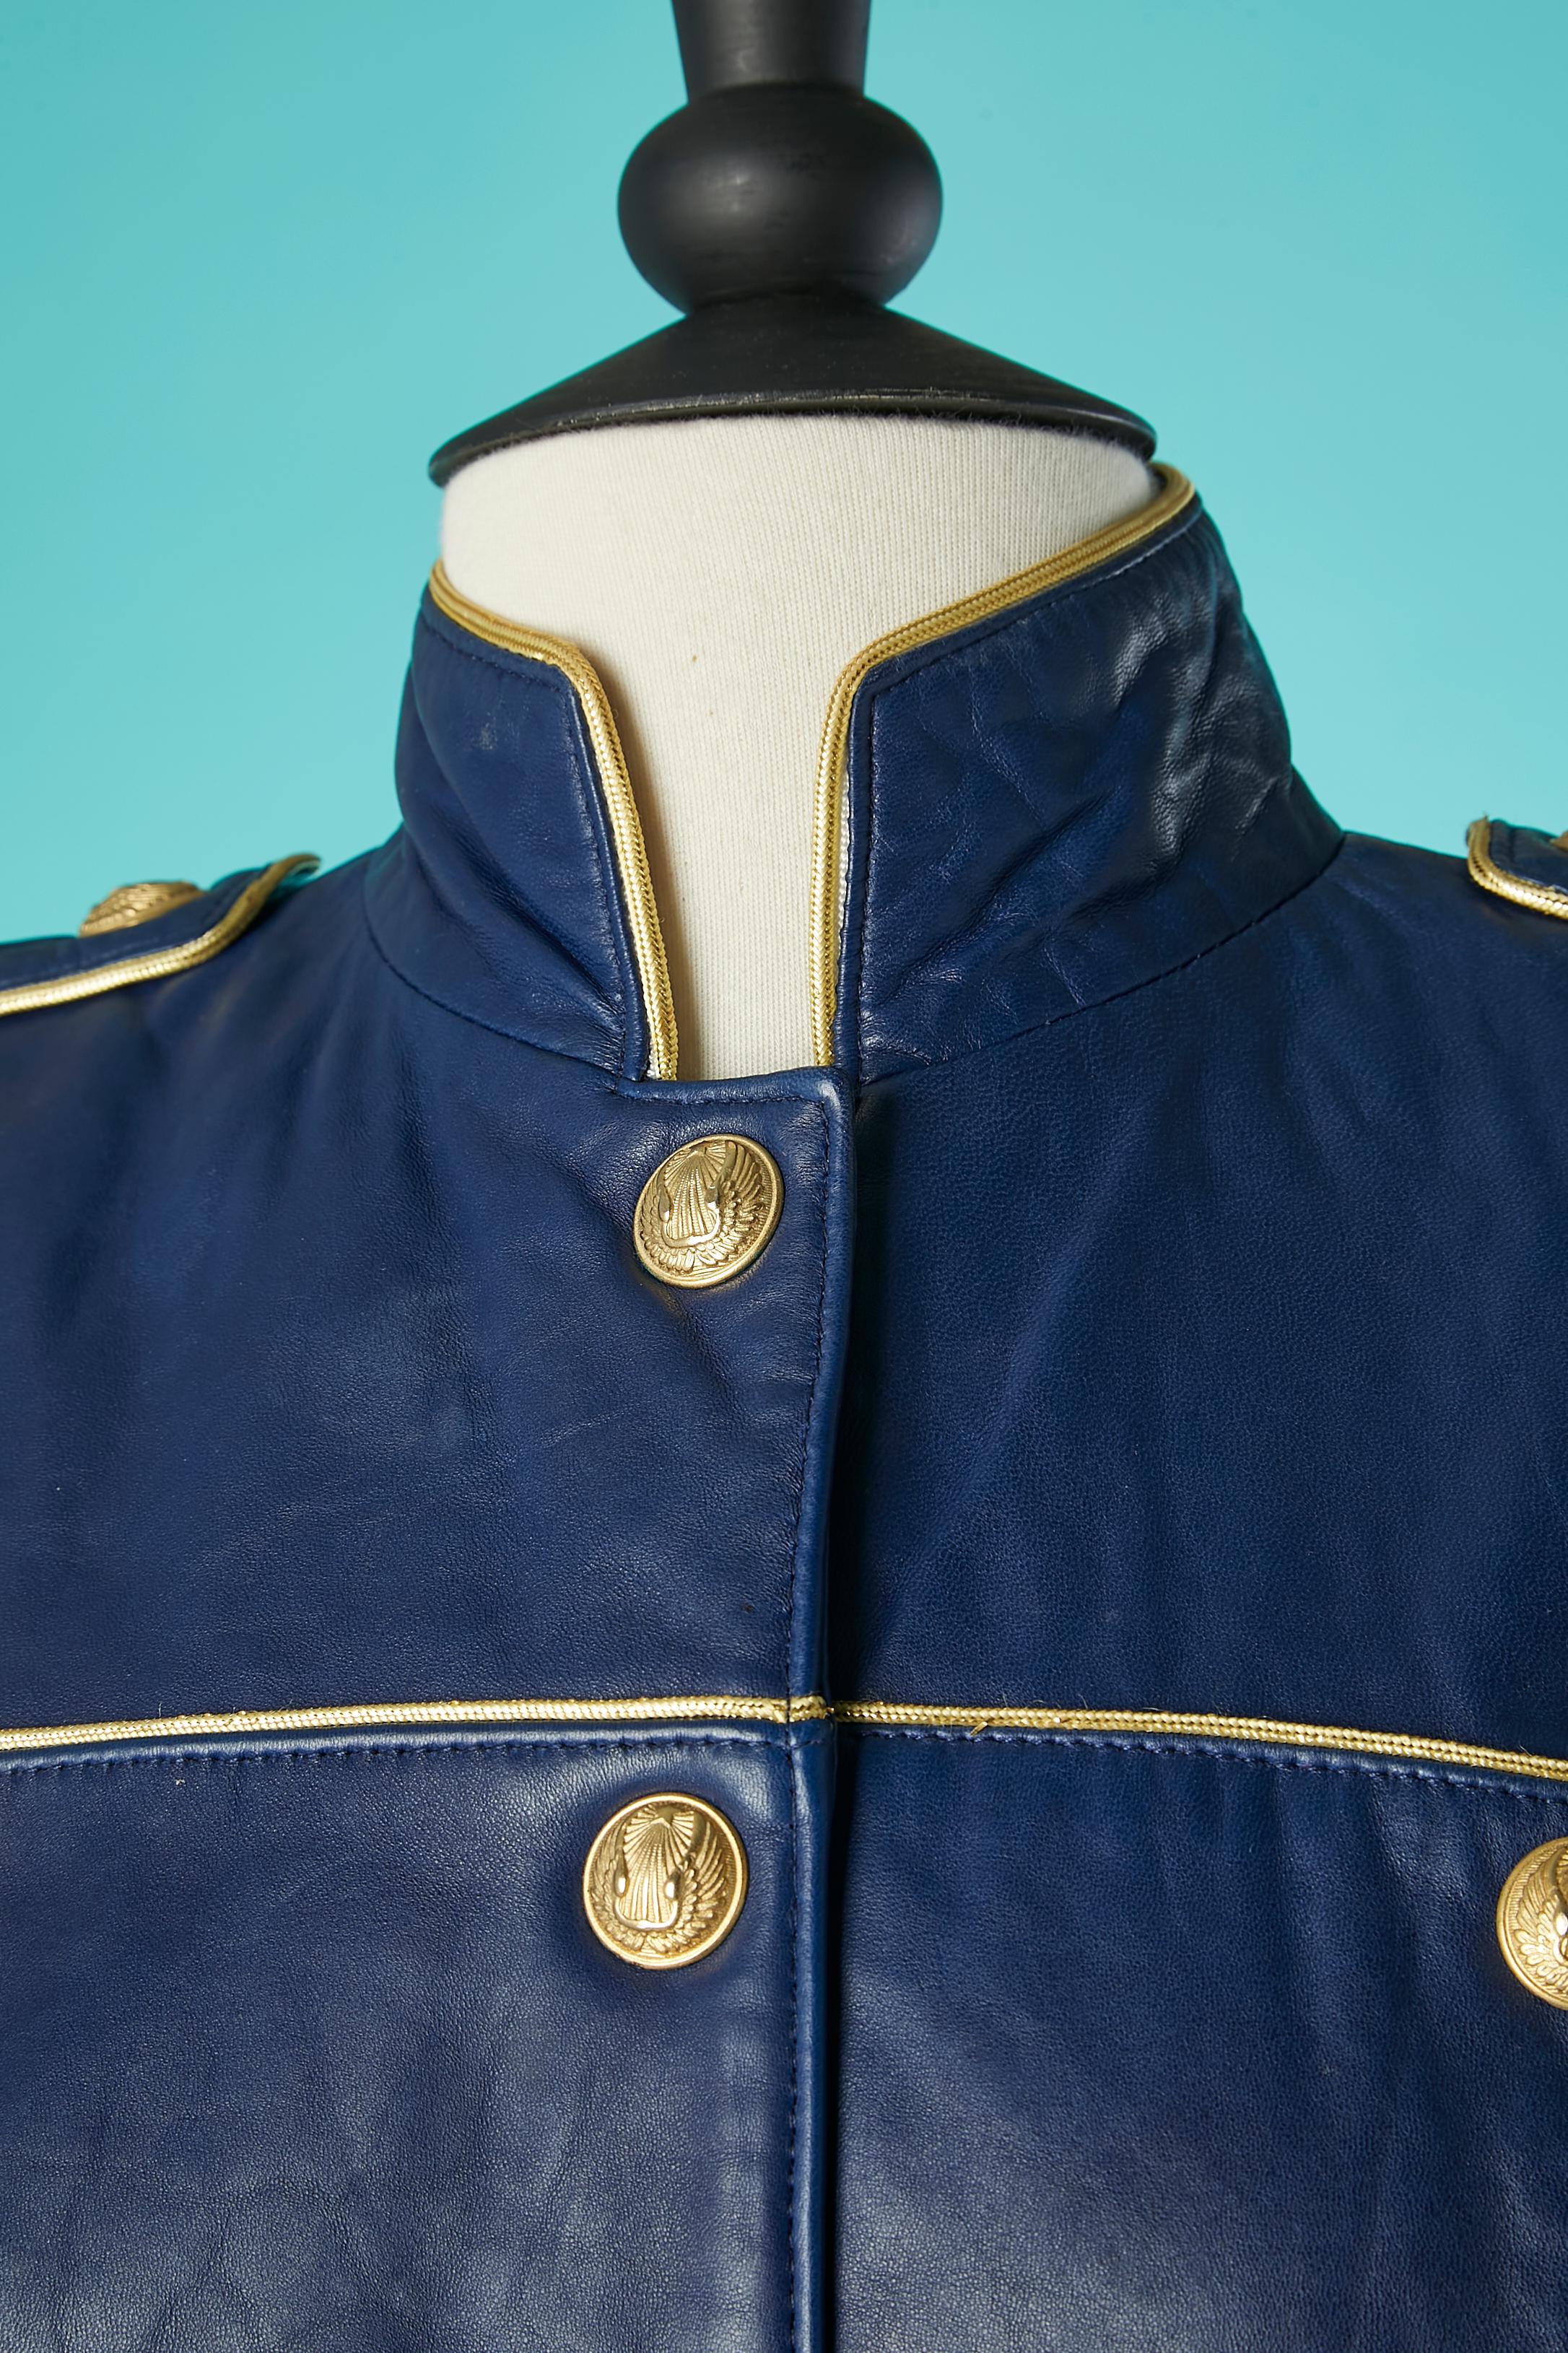 Night blue officier style leather dress. Rayon lining. Large shoulder-pads. Gold metal 